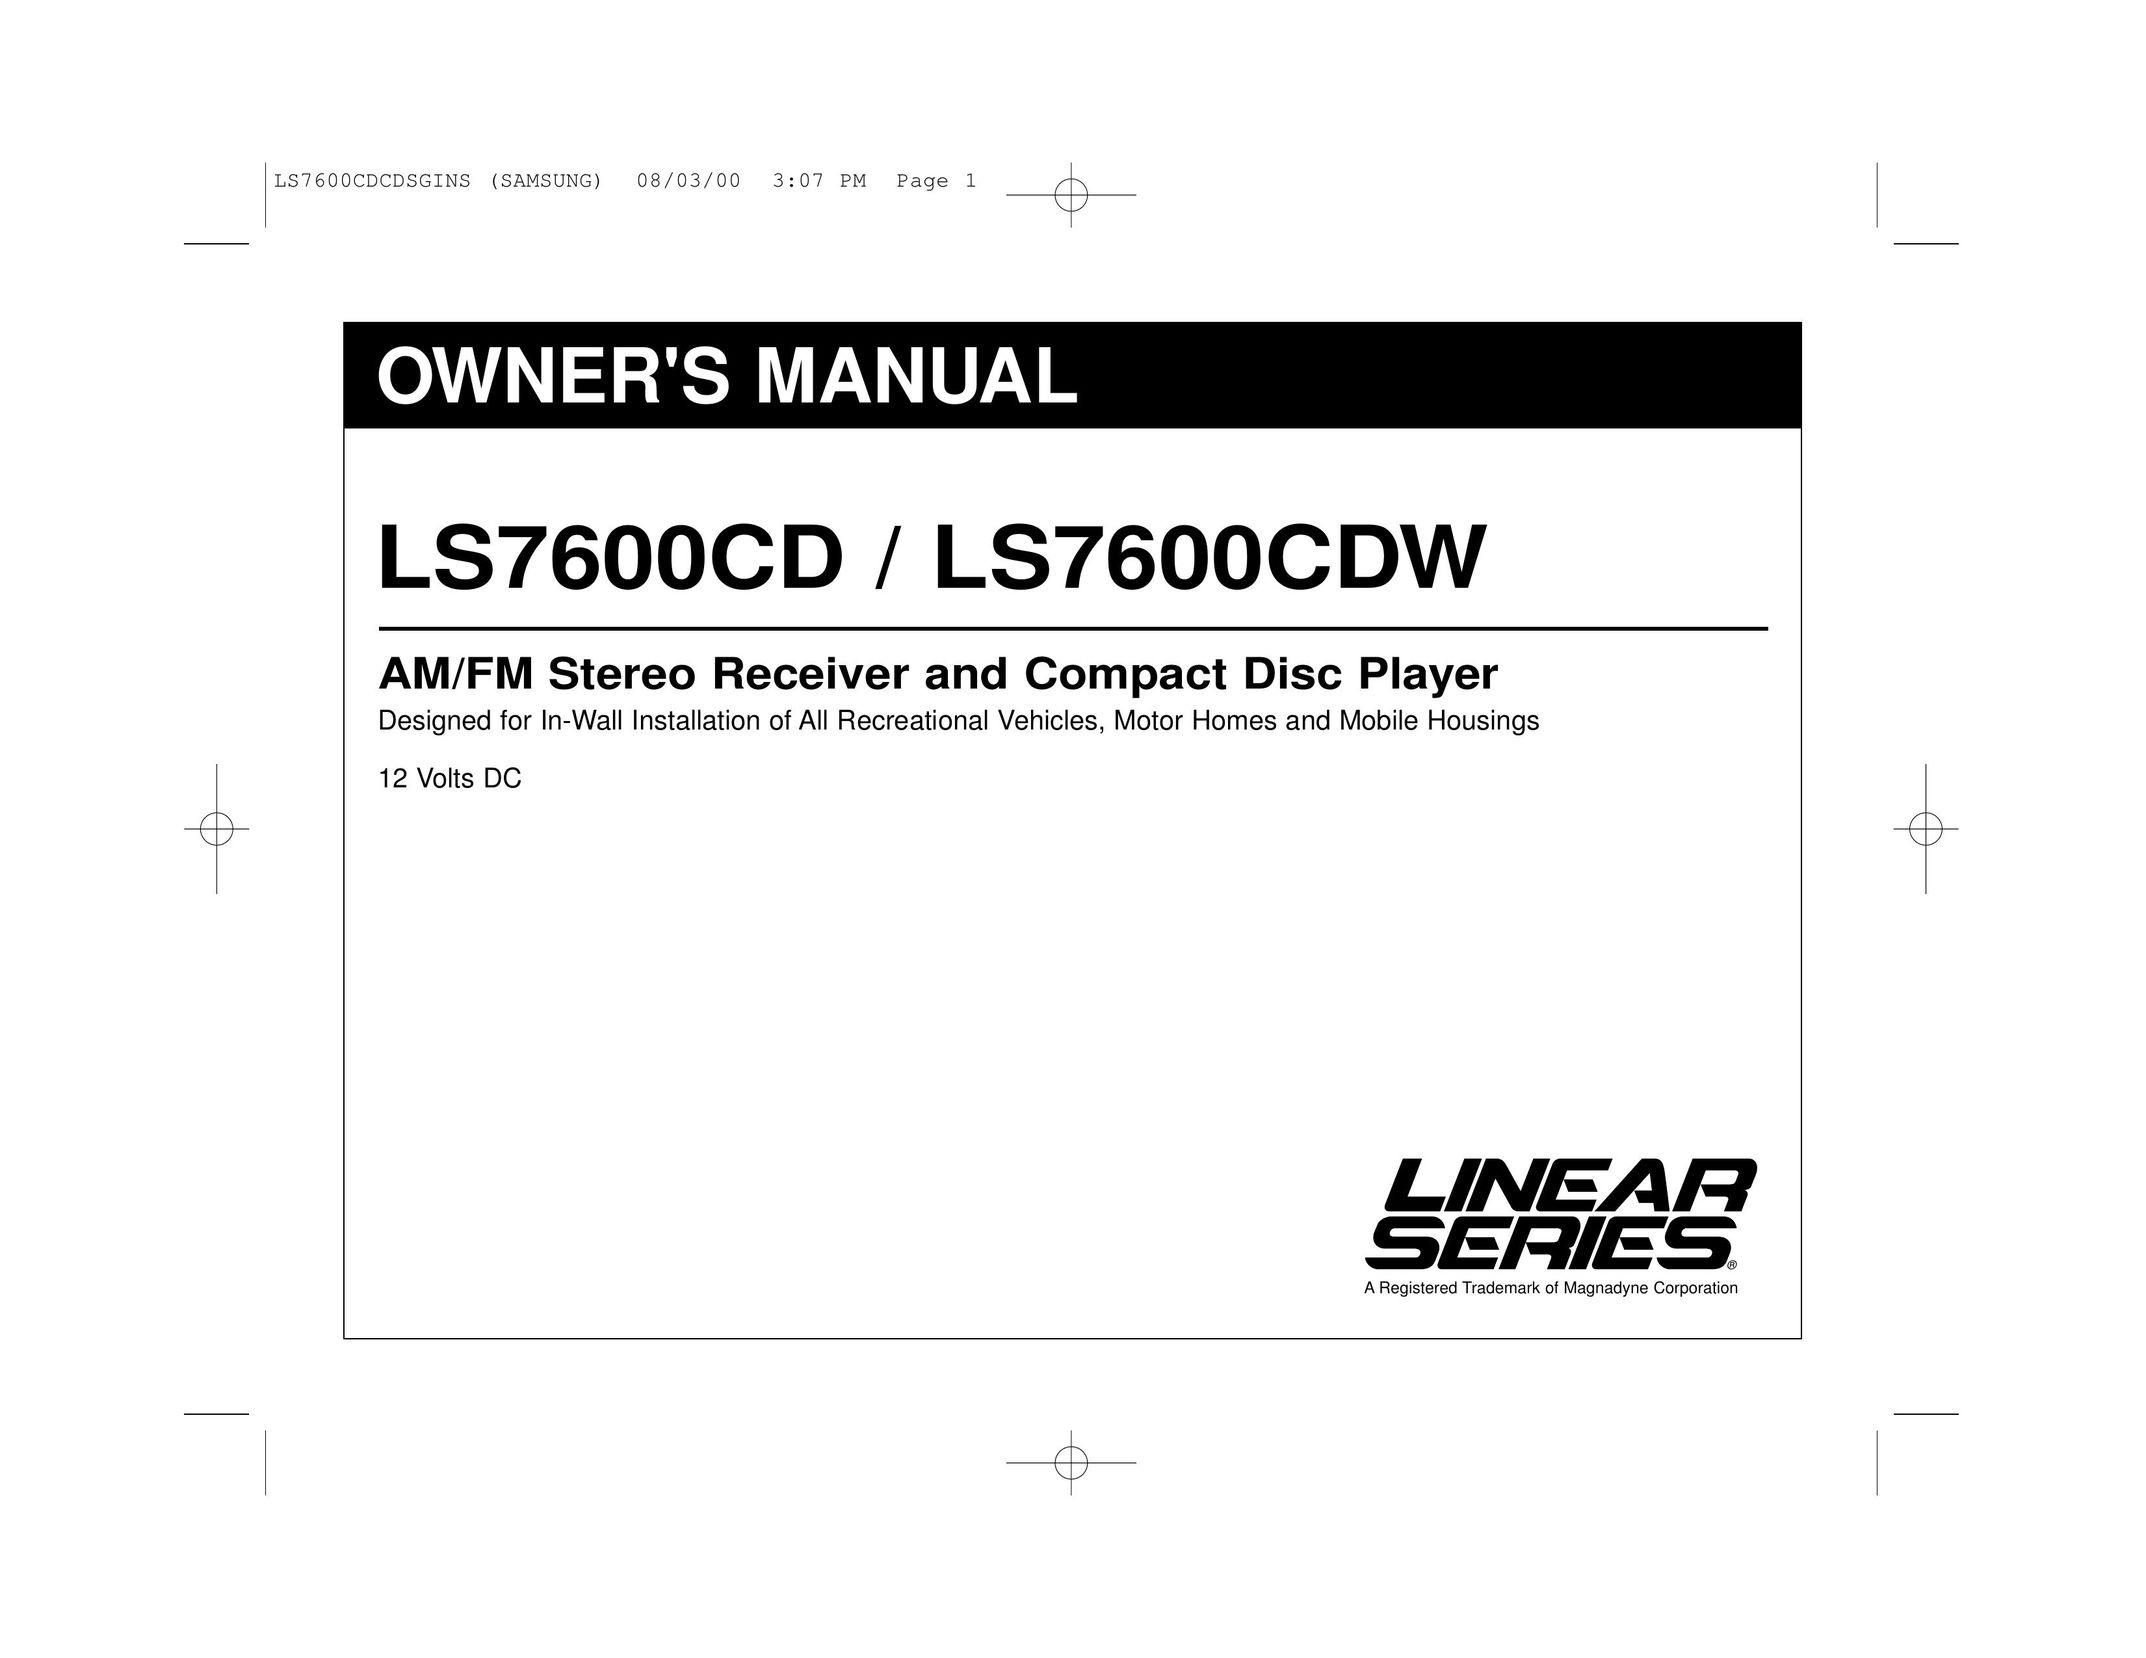 Carbine LS7600CD Stereo Receiver User Manual